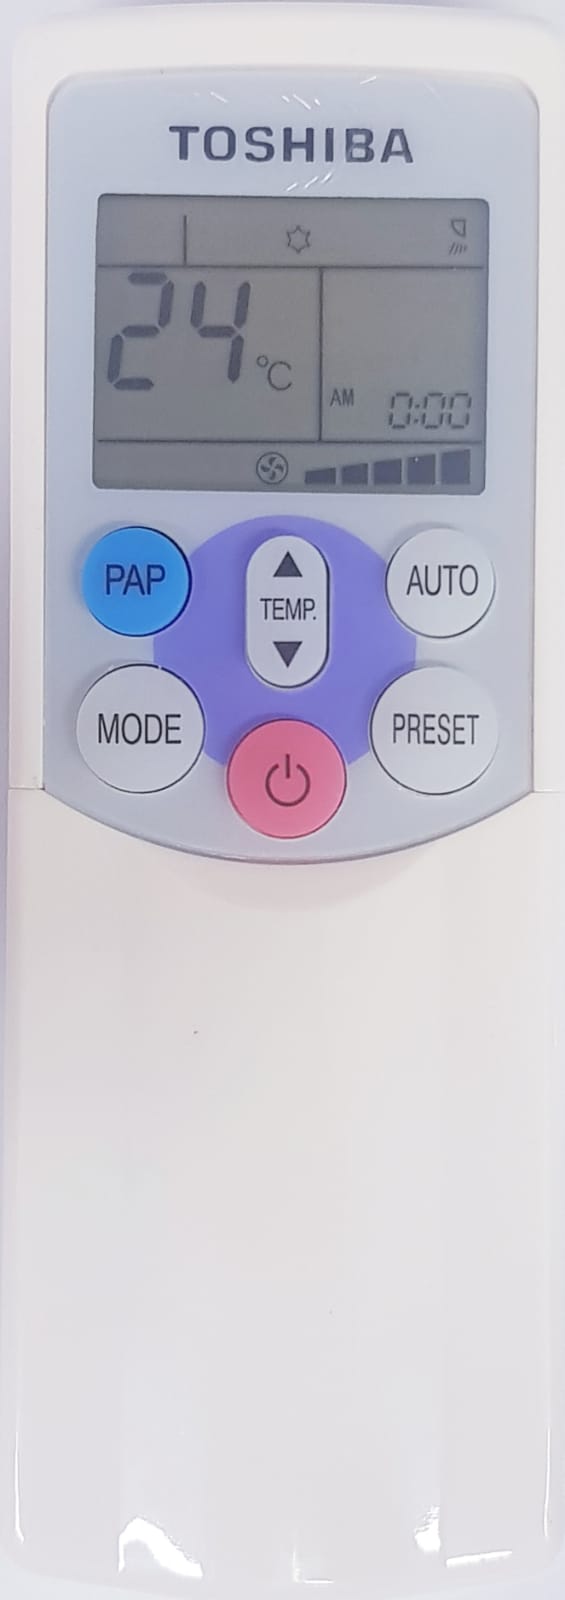 (Local Shop) New High Quality Toshiba AirCon Remote Control for WC-H01EE - New Substitute